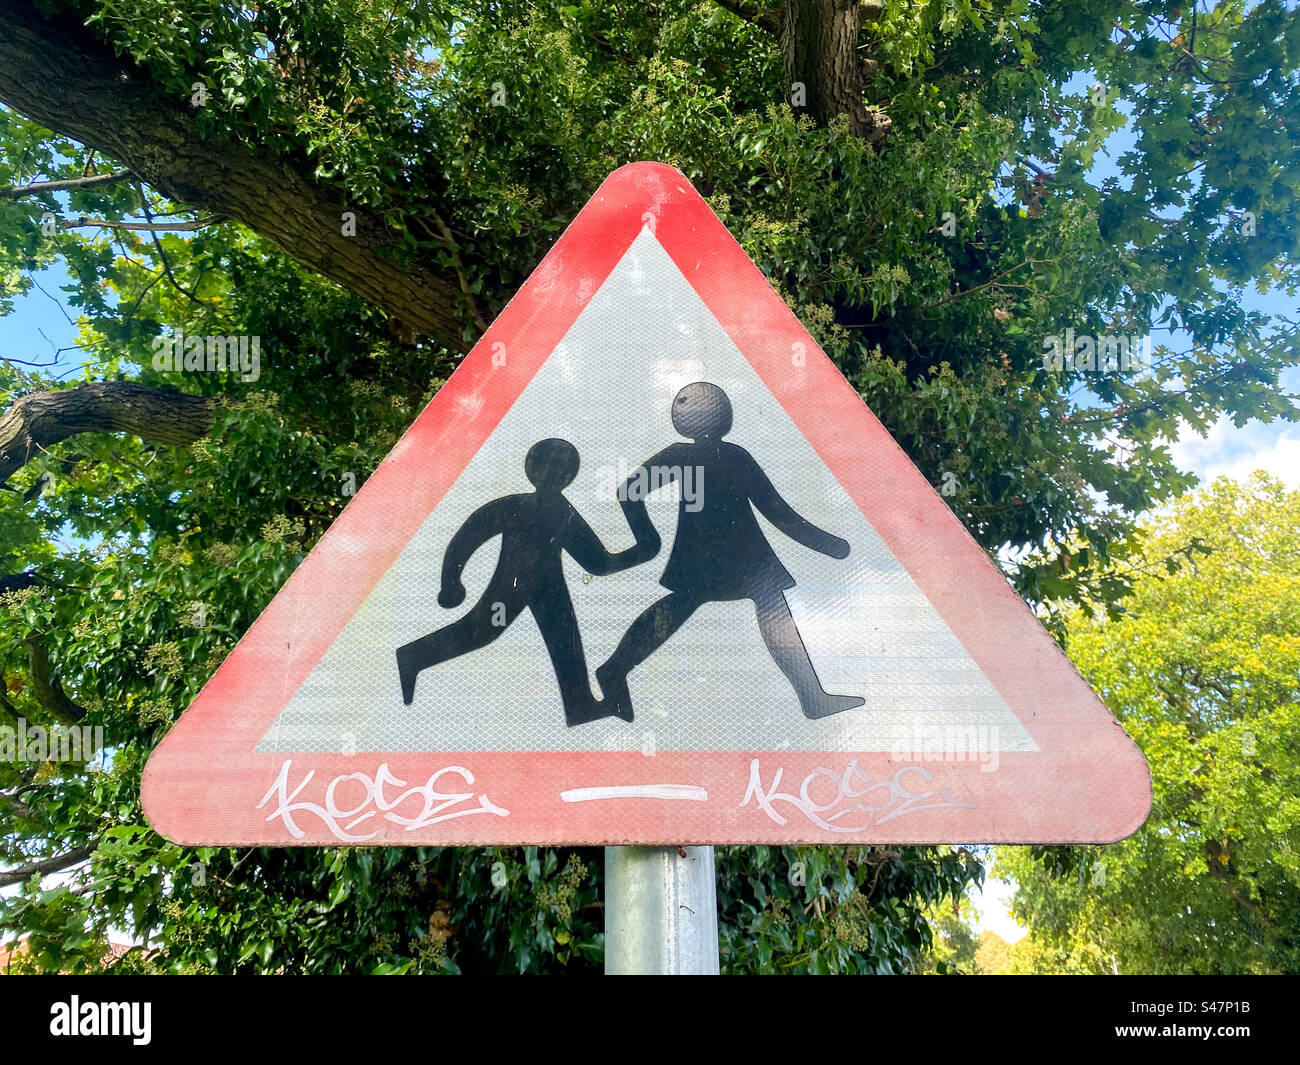 A triangle shaped road sign warning drivers about children crossing the road near a school. Stock Photo